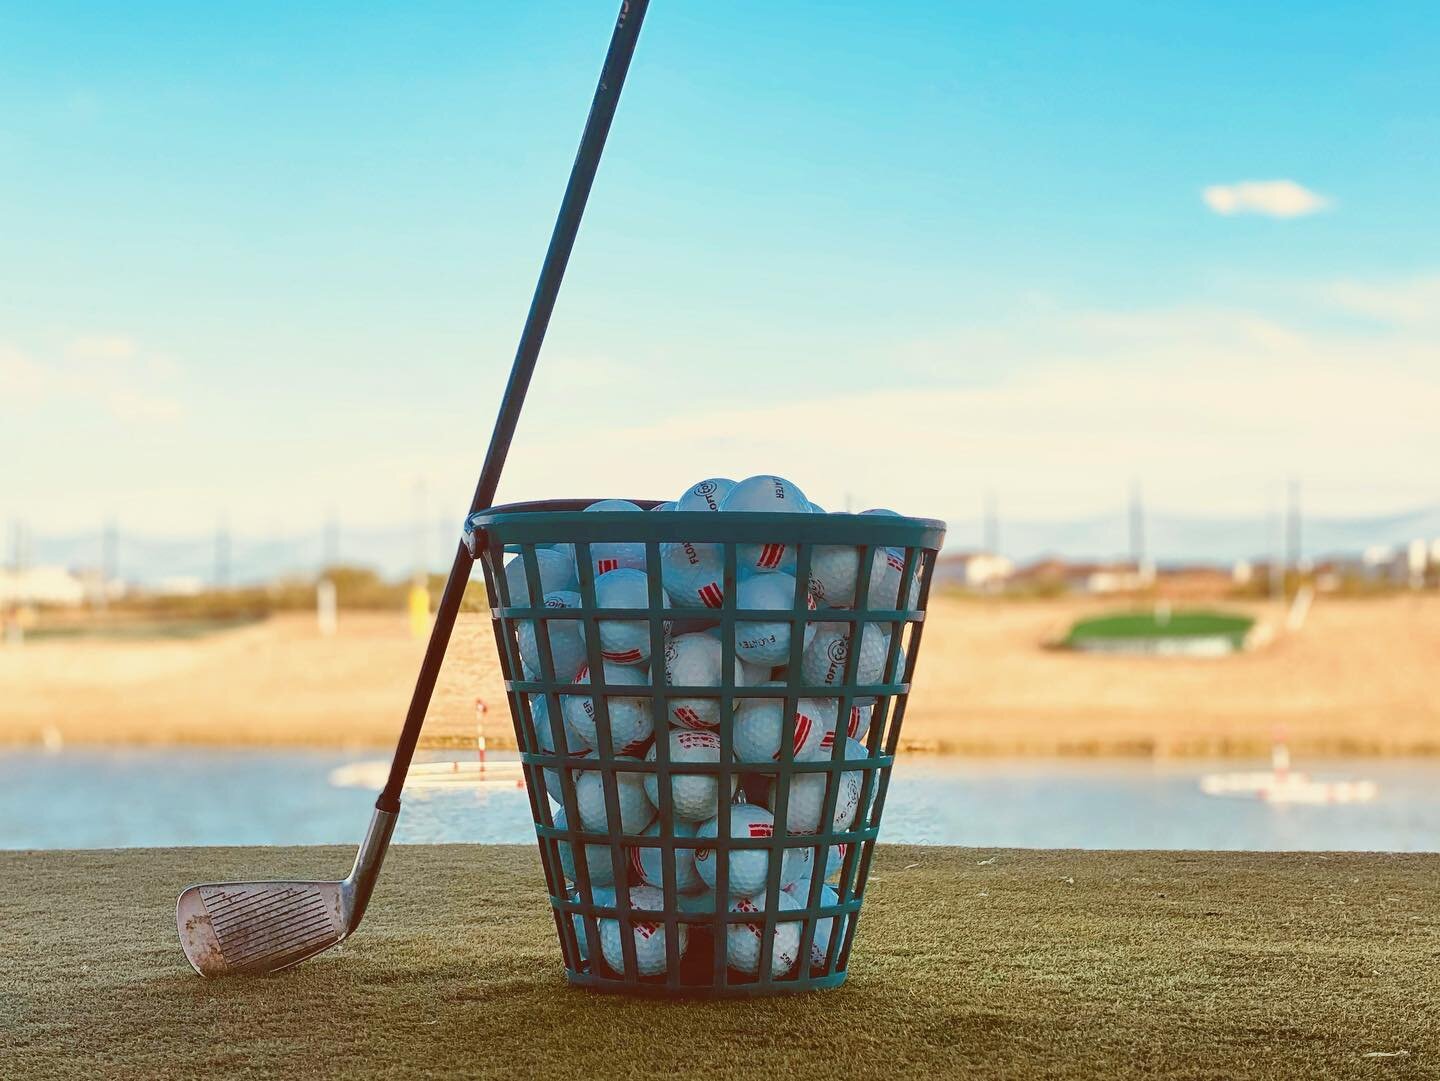 It&rsquo;s a great day for some golf!🏌🏻&zwj;♀️So come join us at our driving range and grab yourself a bucket! Now open from 3:00 - 9:00. Last sale is at 8:45! Don&rsquo;t miss out! ⛳️

#laredo #texas #southtexas #956 #golf #minigolf #alexanderboar